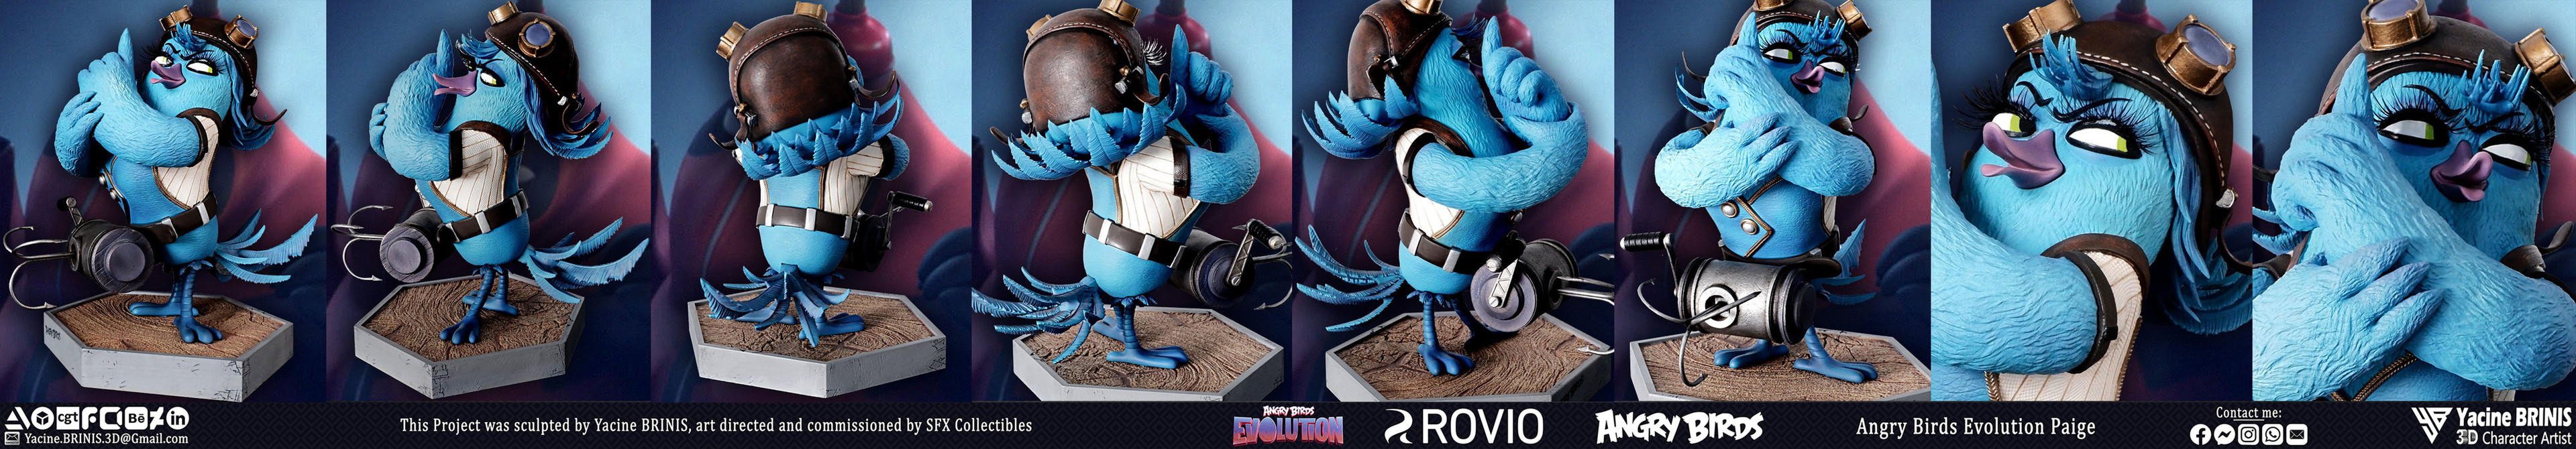 Paige Angry Birds Evolution Rovio sculpted by Yacine BRINIS Printed by SFX Collectibles 001